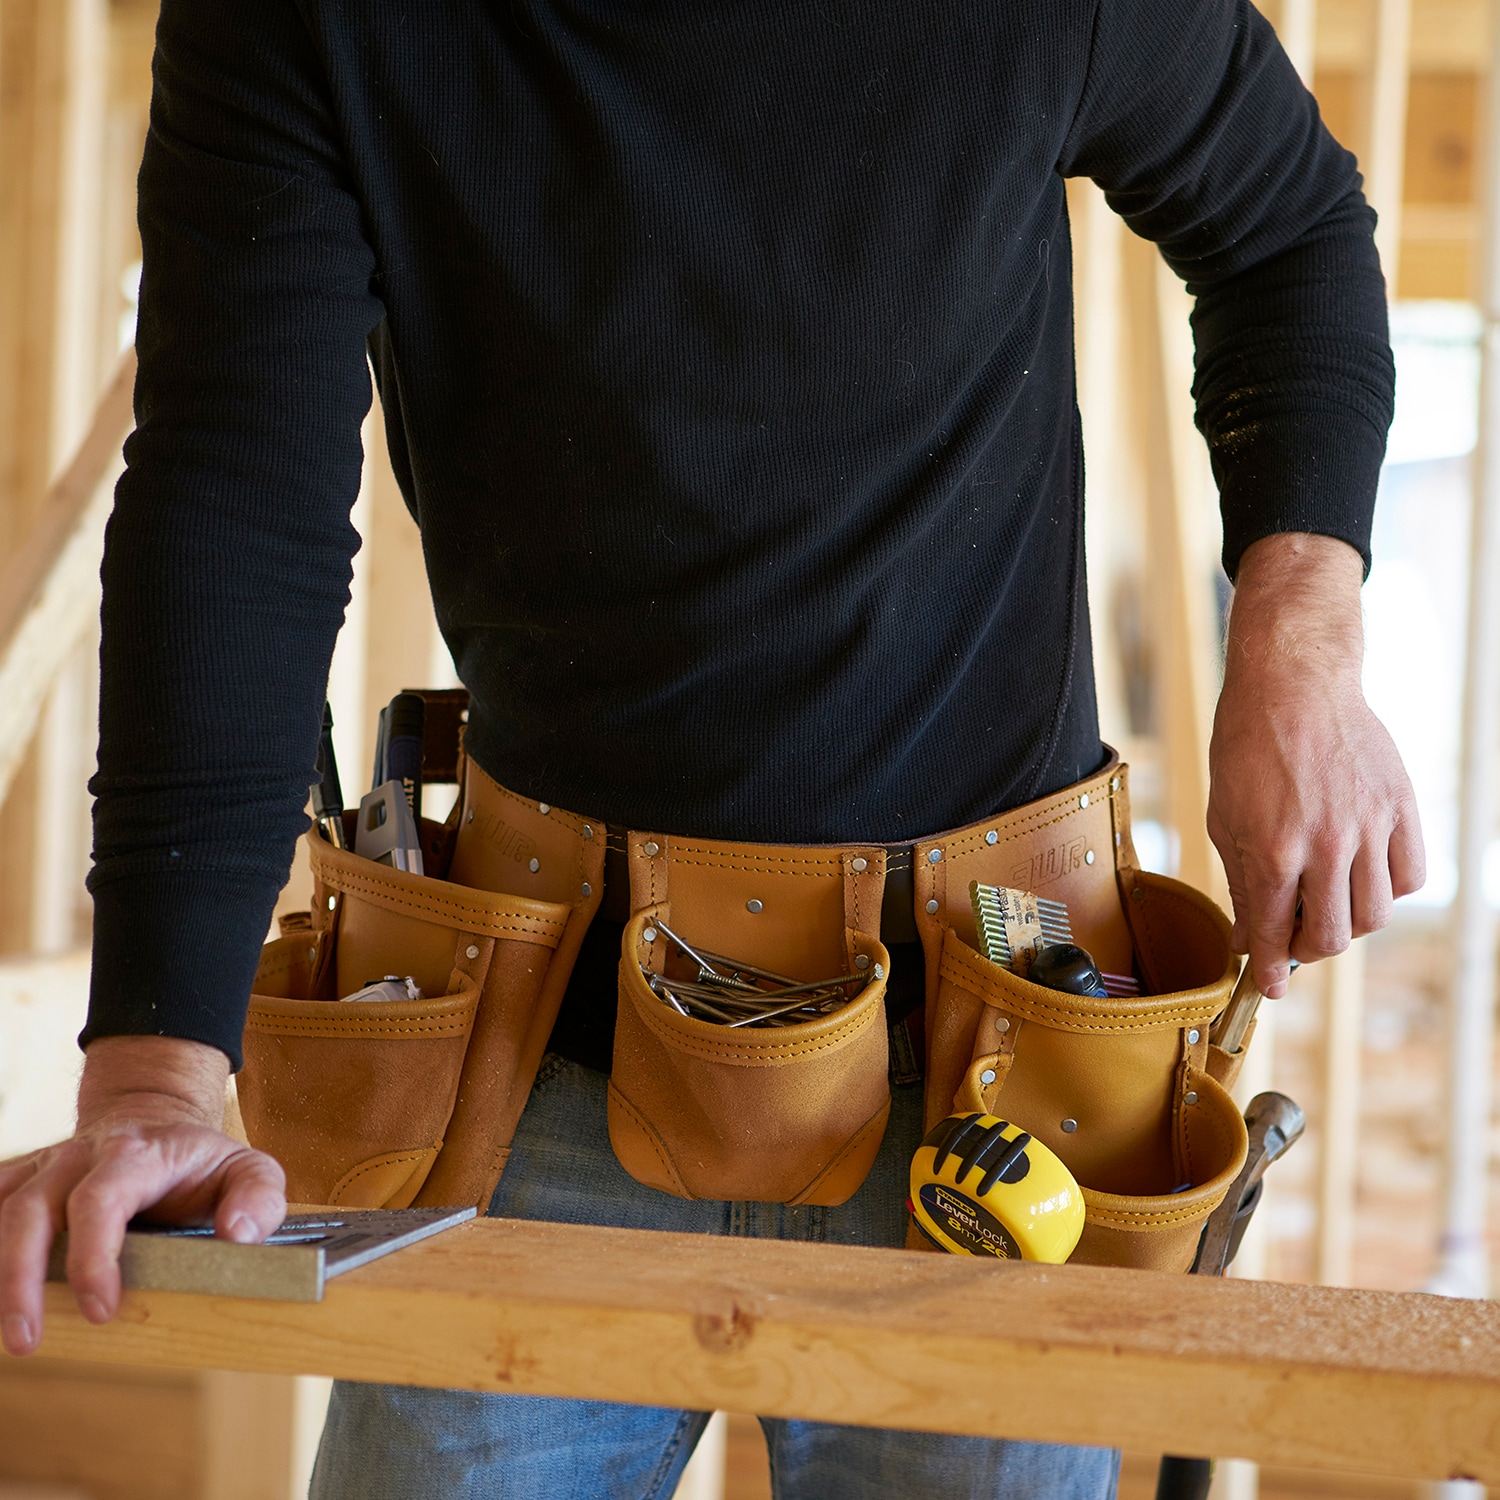 AWP General Construction Leather Tool Apron in the Tool Belts ...